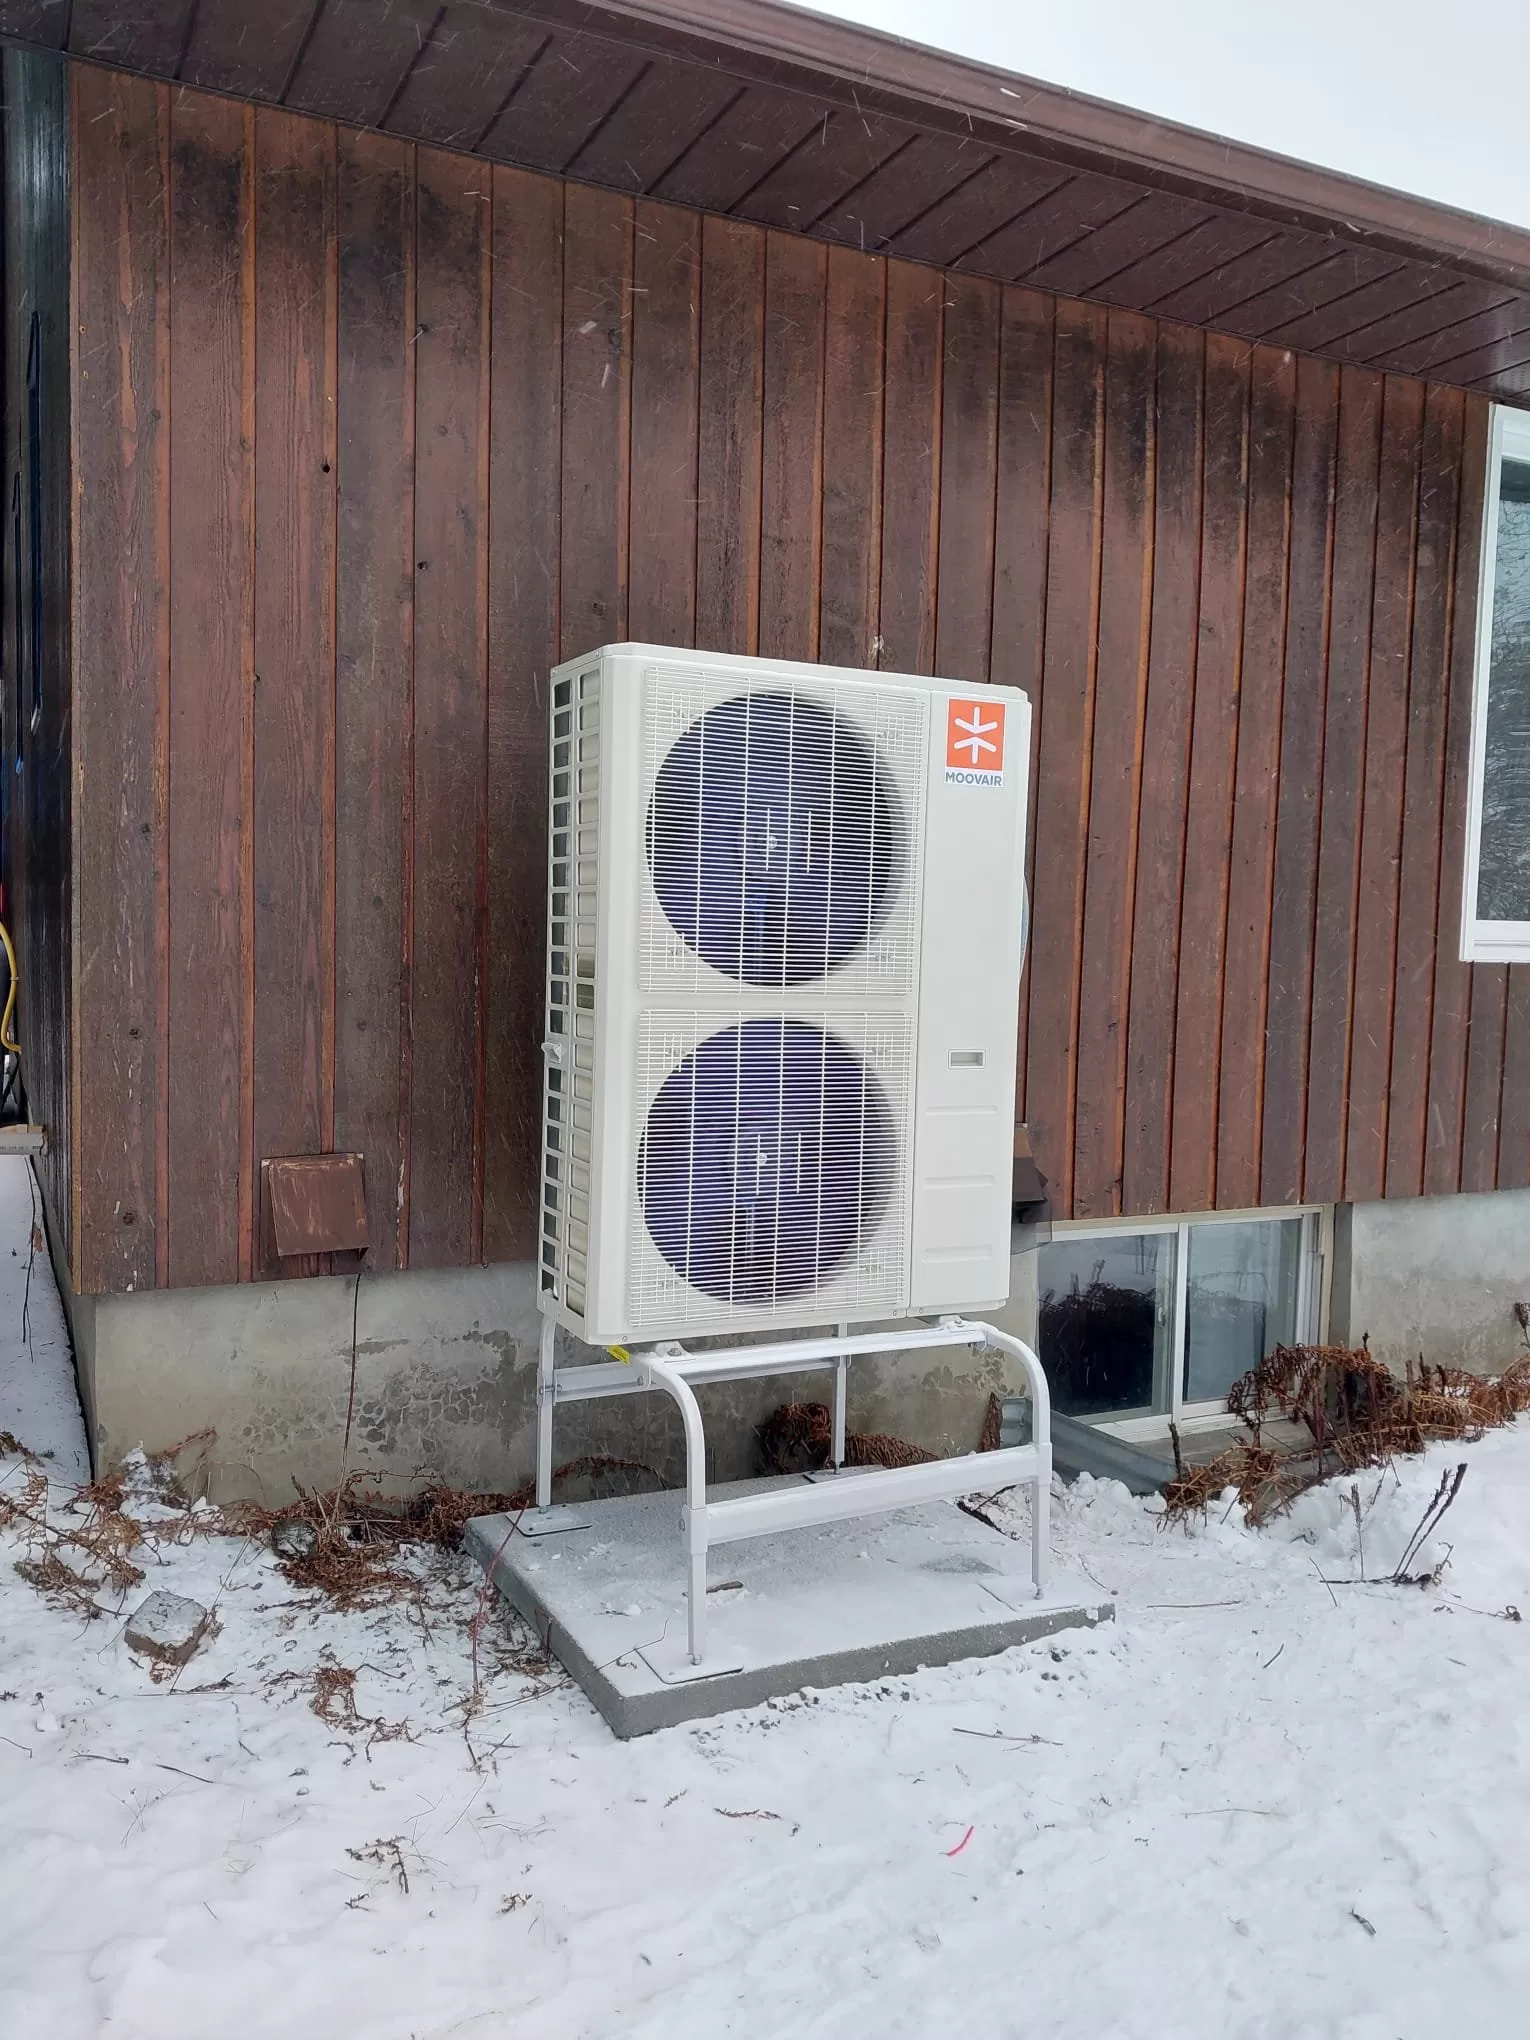 Moovair Heat Pump Review: A Guide for Ottawa Homeowners